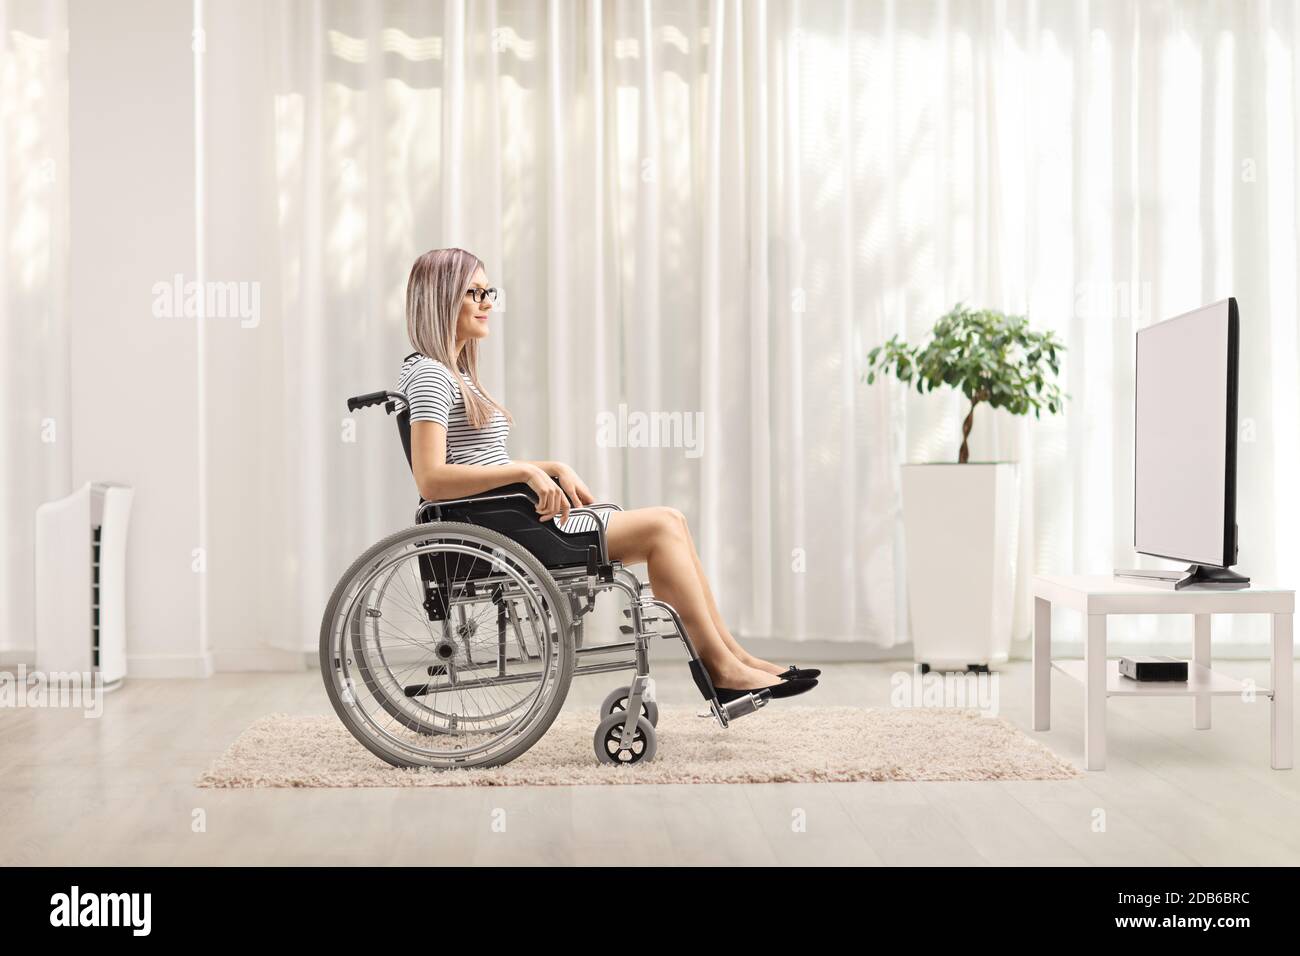 Profile shot of a young blond woman in a wheelchair watching tv Stock Photo